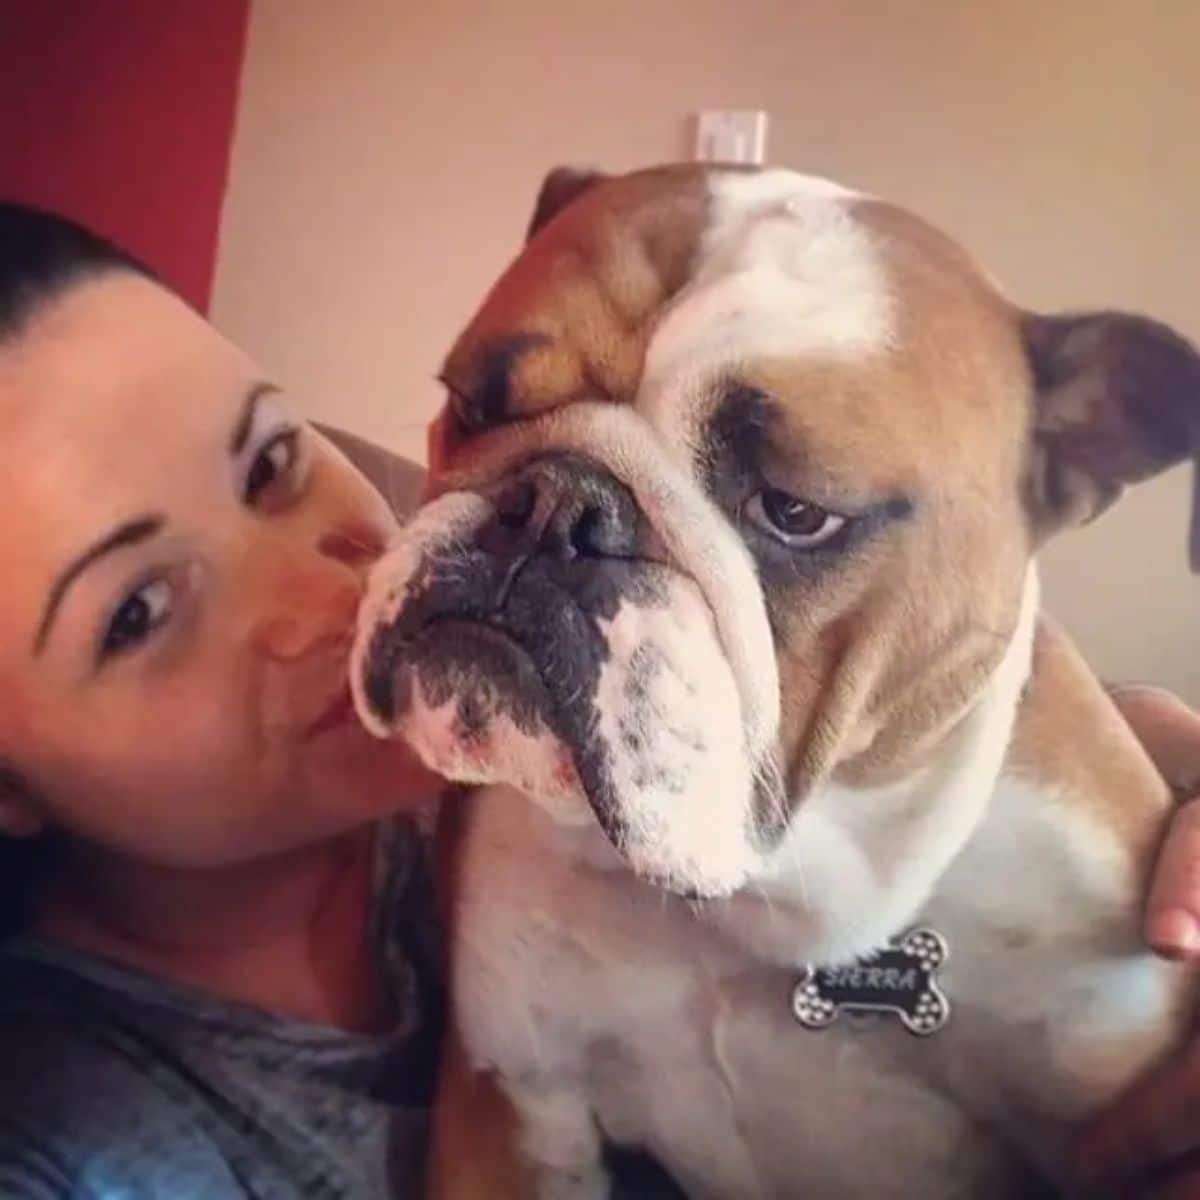 brown and white bulldog being held by a woman and looking grumpy